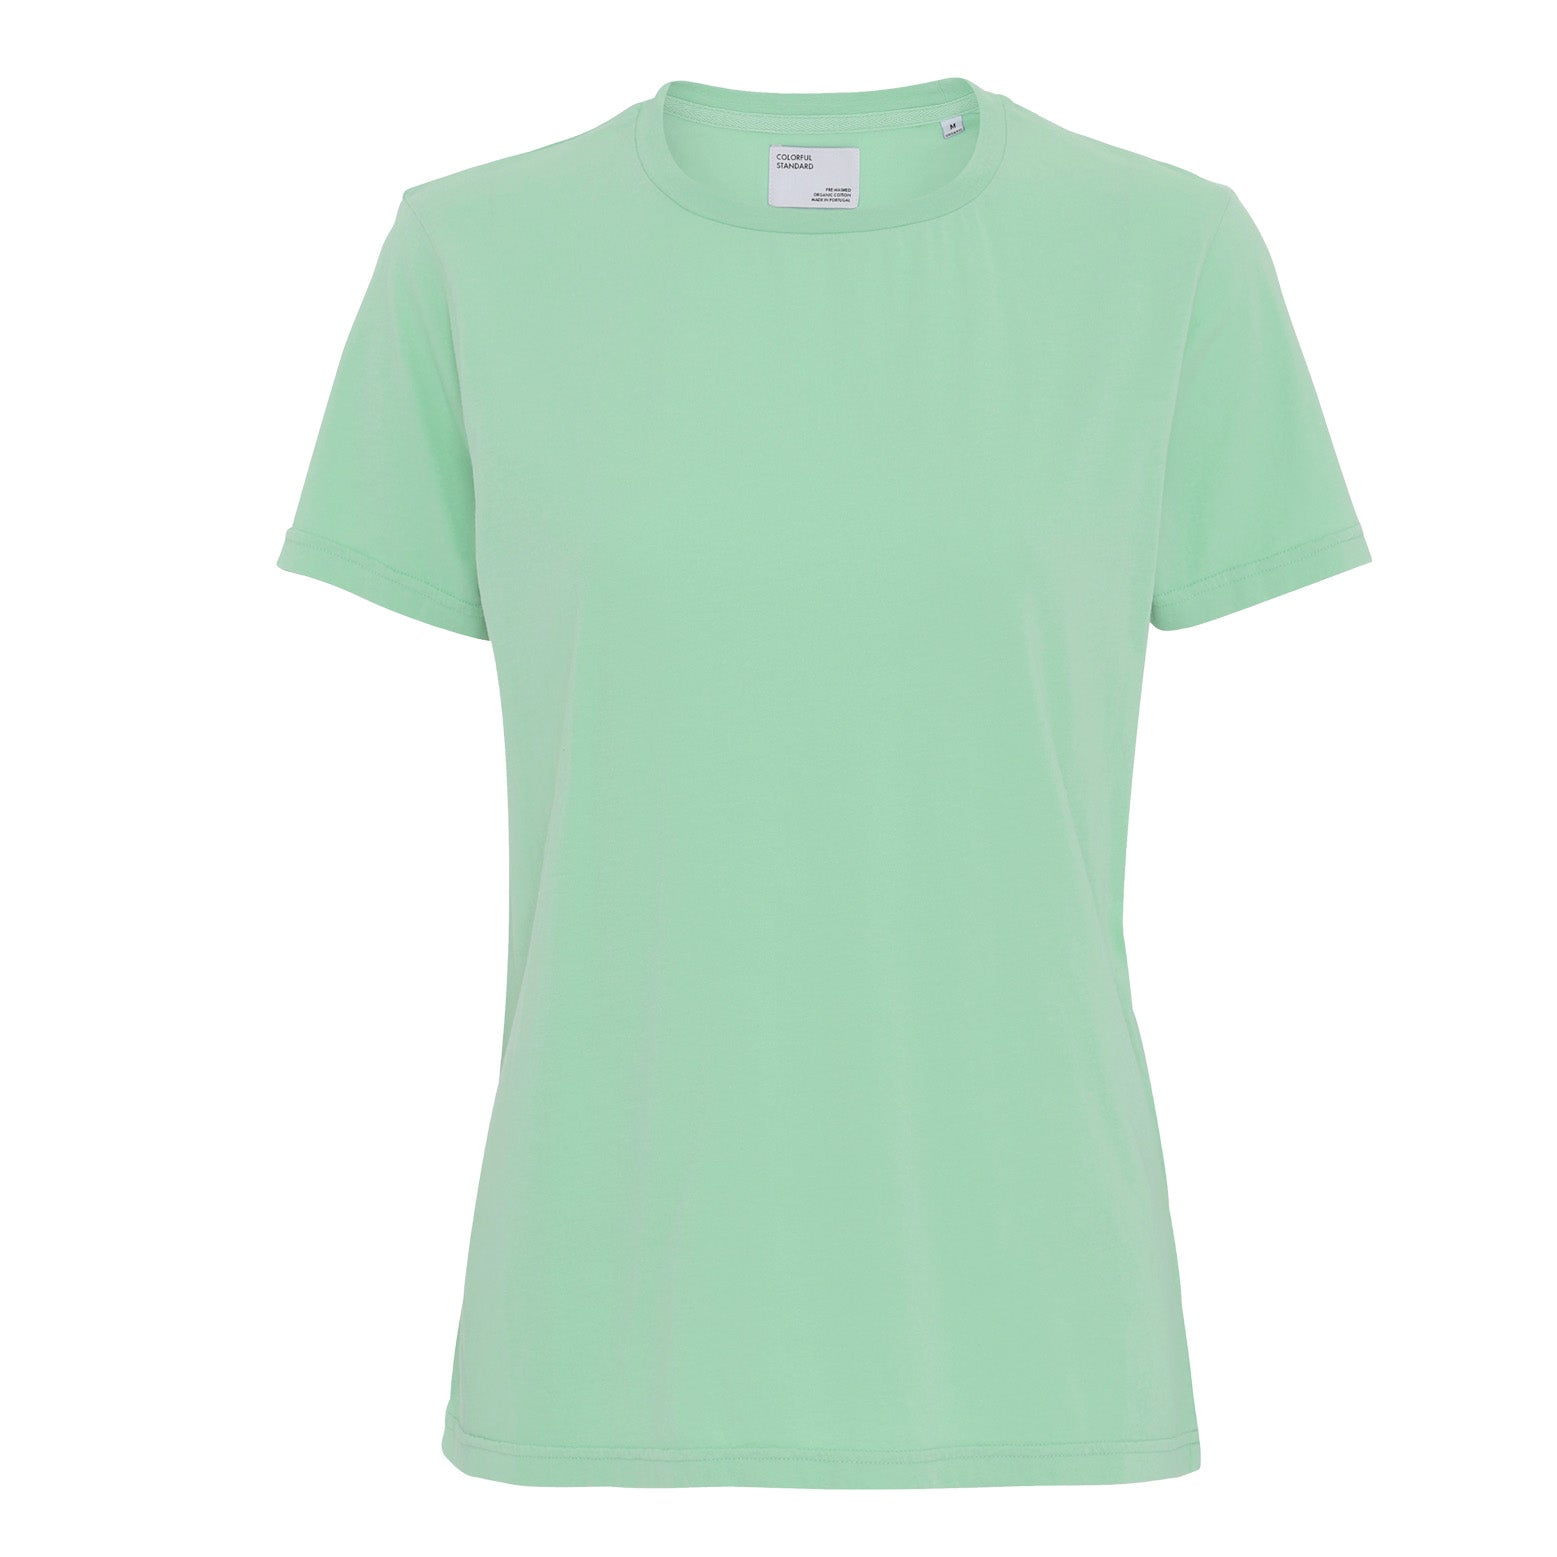 Colorful Standard Light Organic Tee - Faded Mint - White Feather Boutique